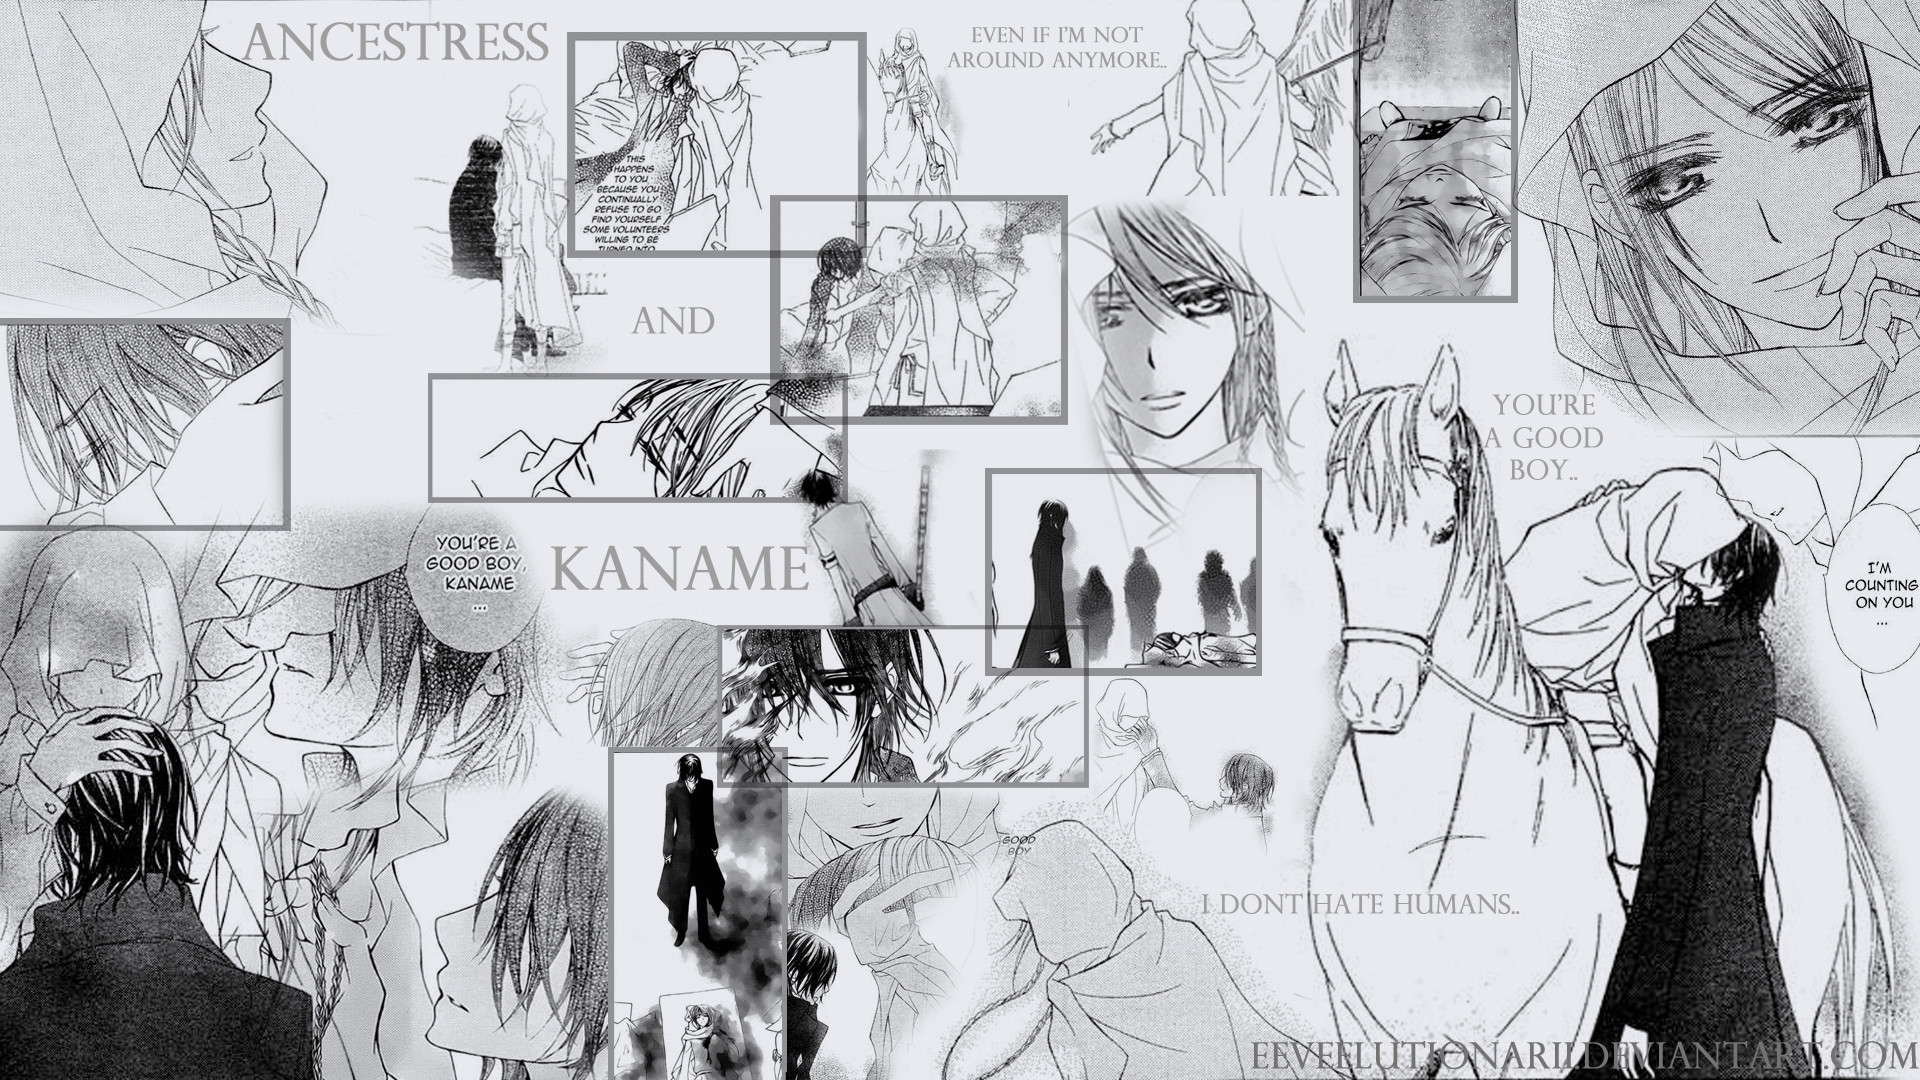 1920x1080 ... Kaname and the Ancestress (Hooded Woman) Wallpaper by Eeveelutionarii